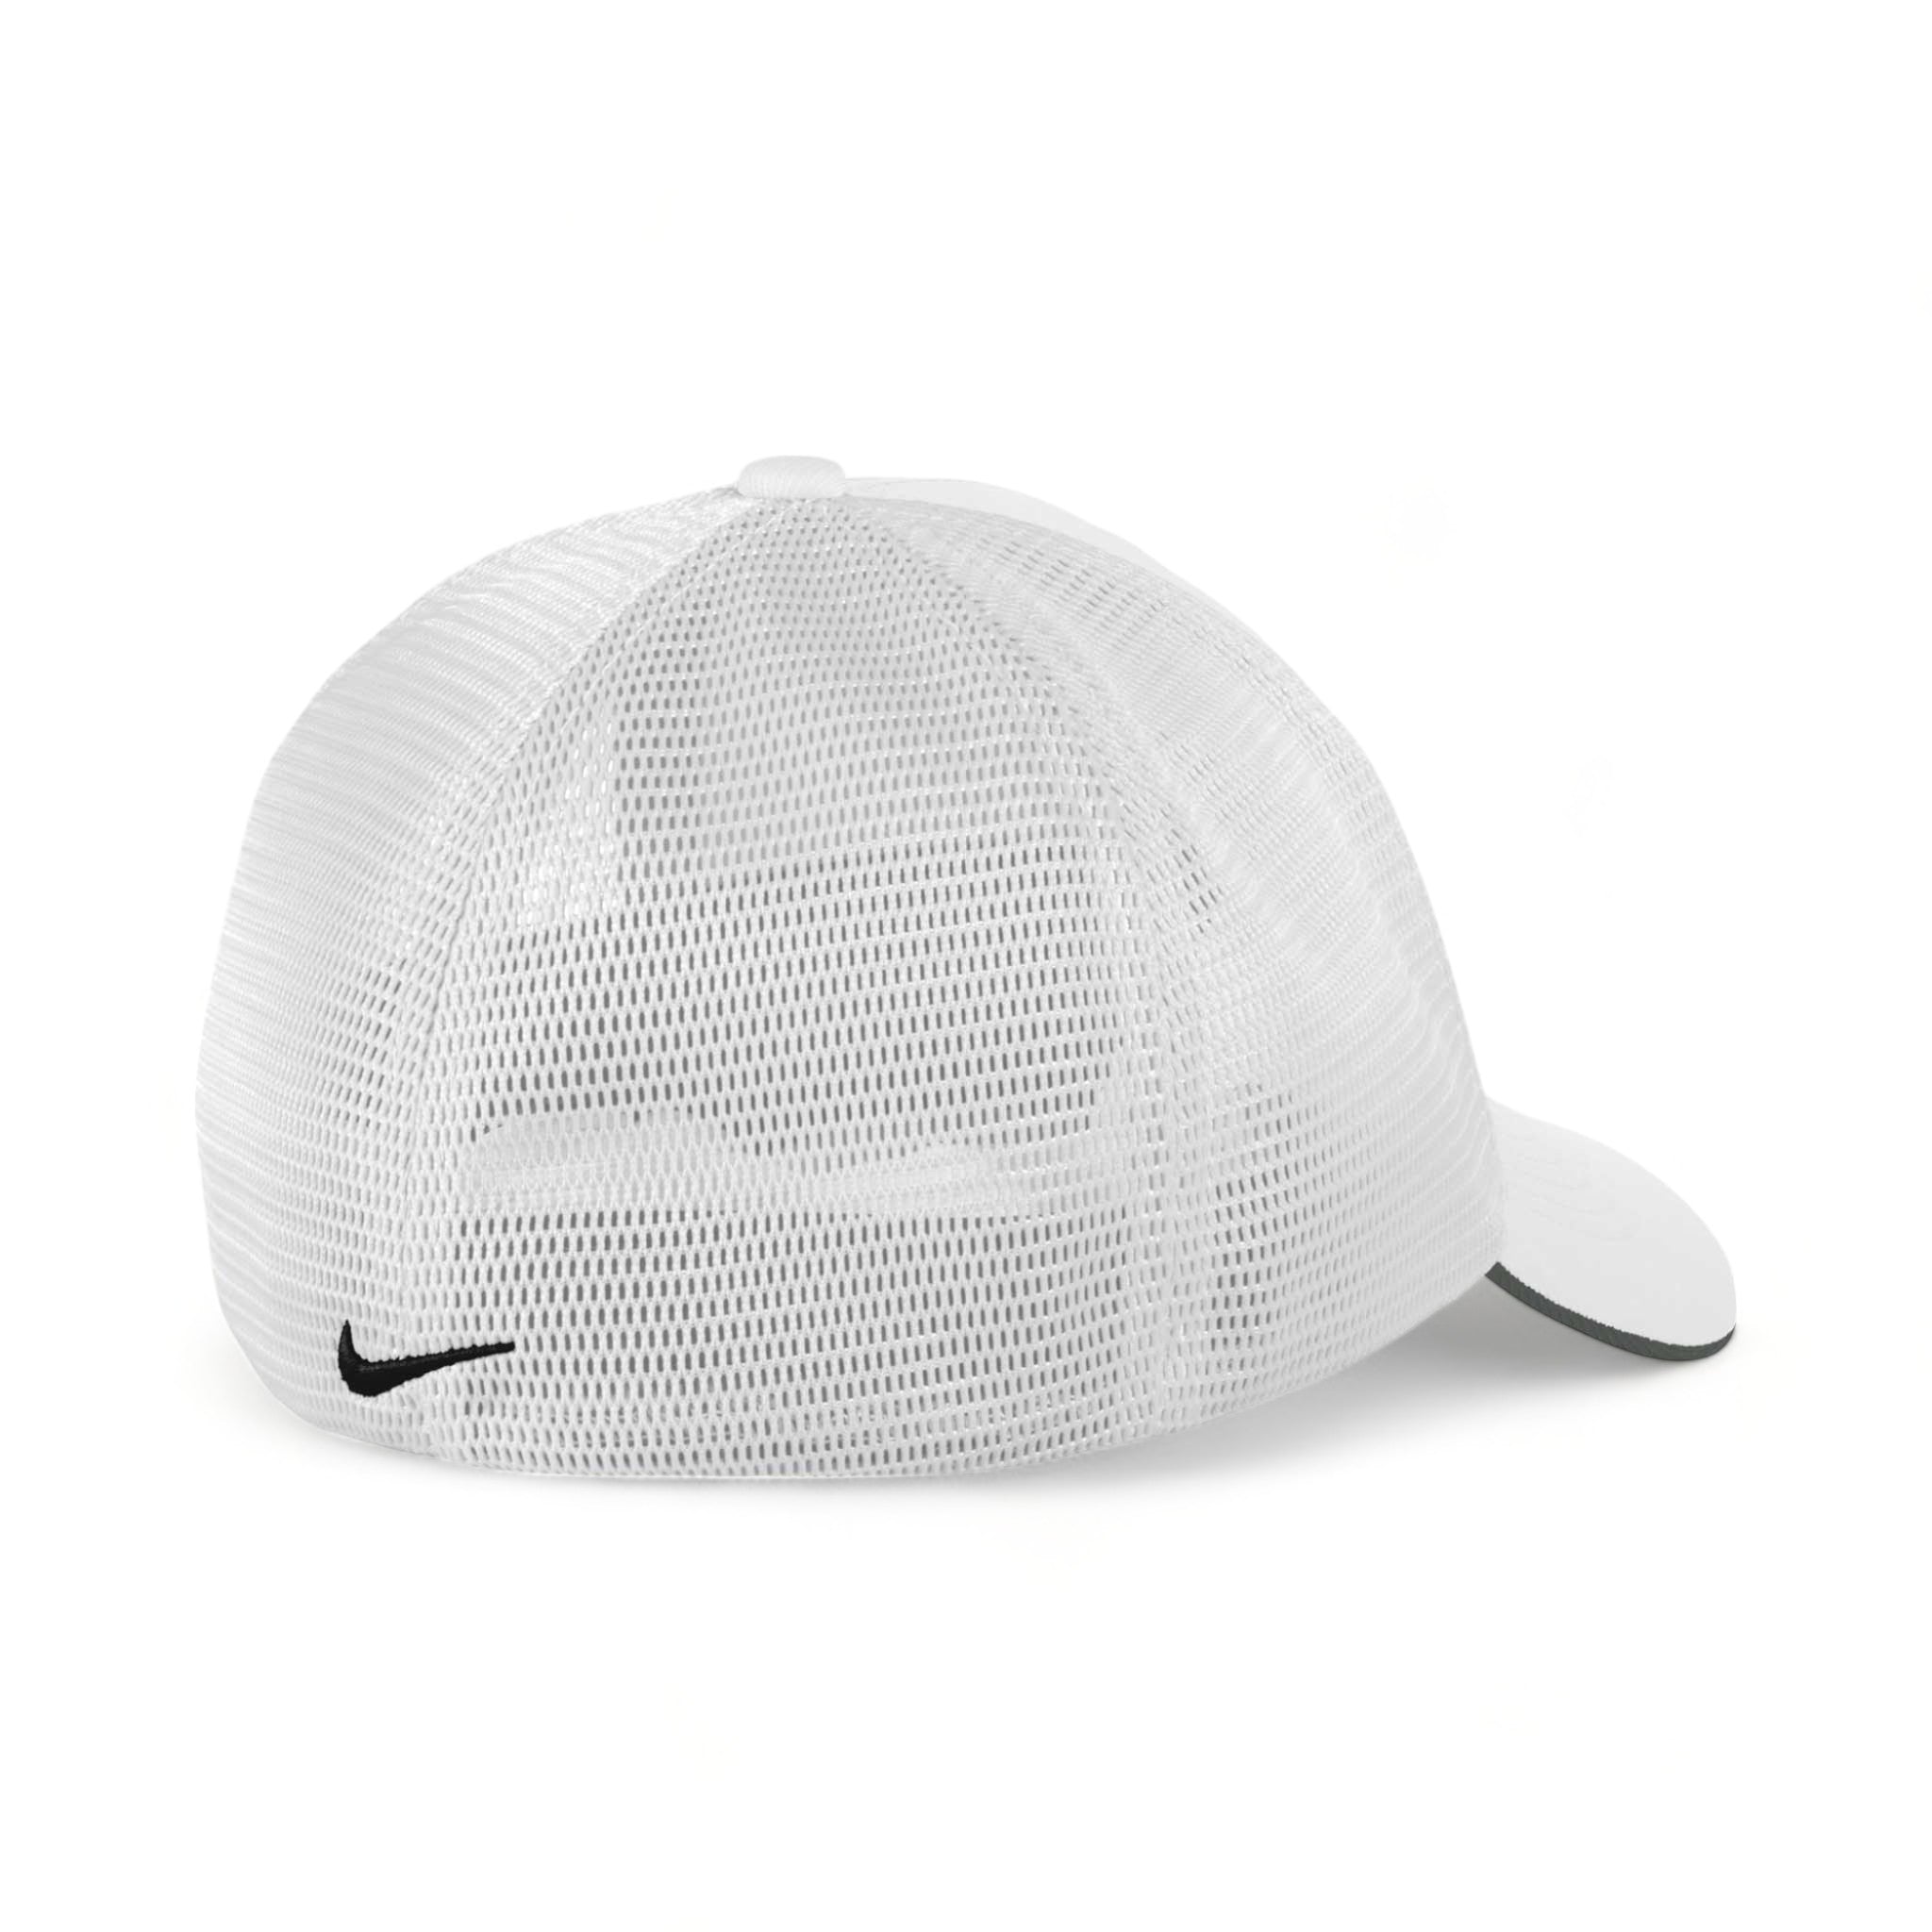 Back view of Nike NKFB6448 custom hat in white and white